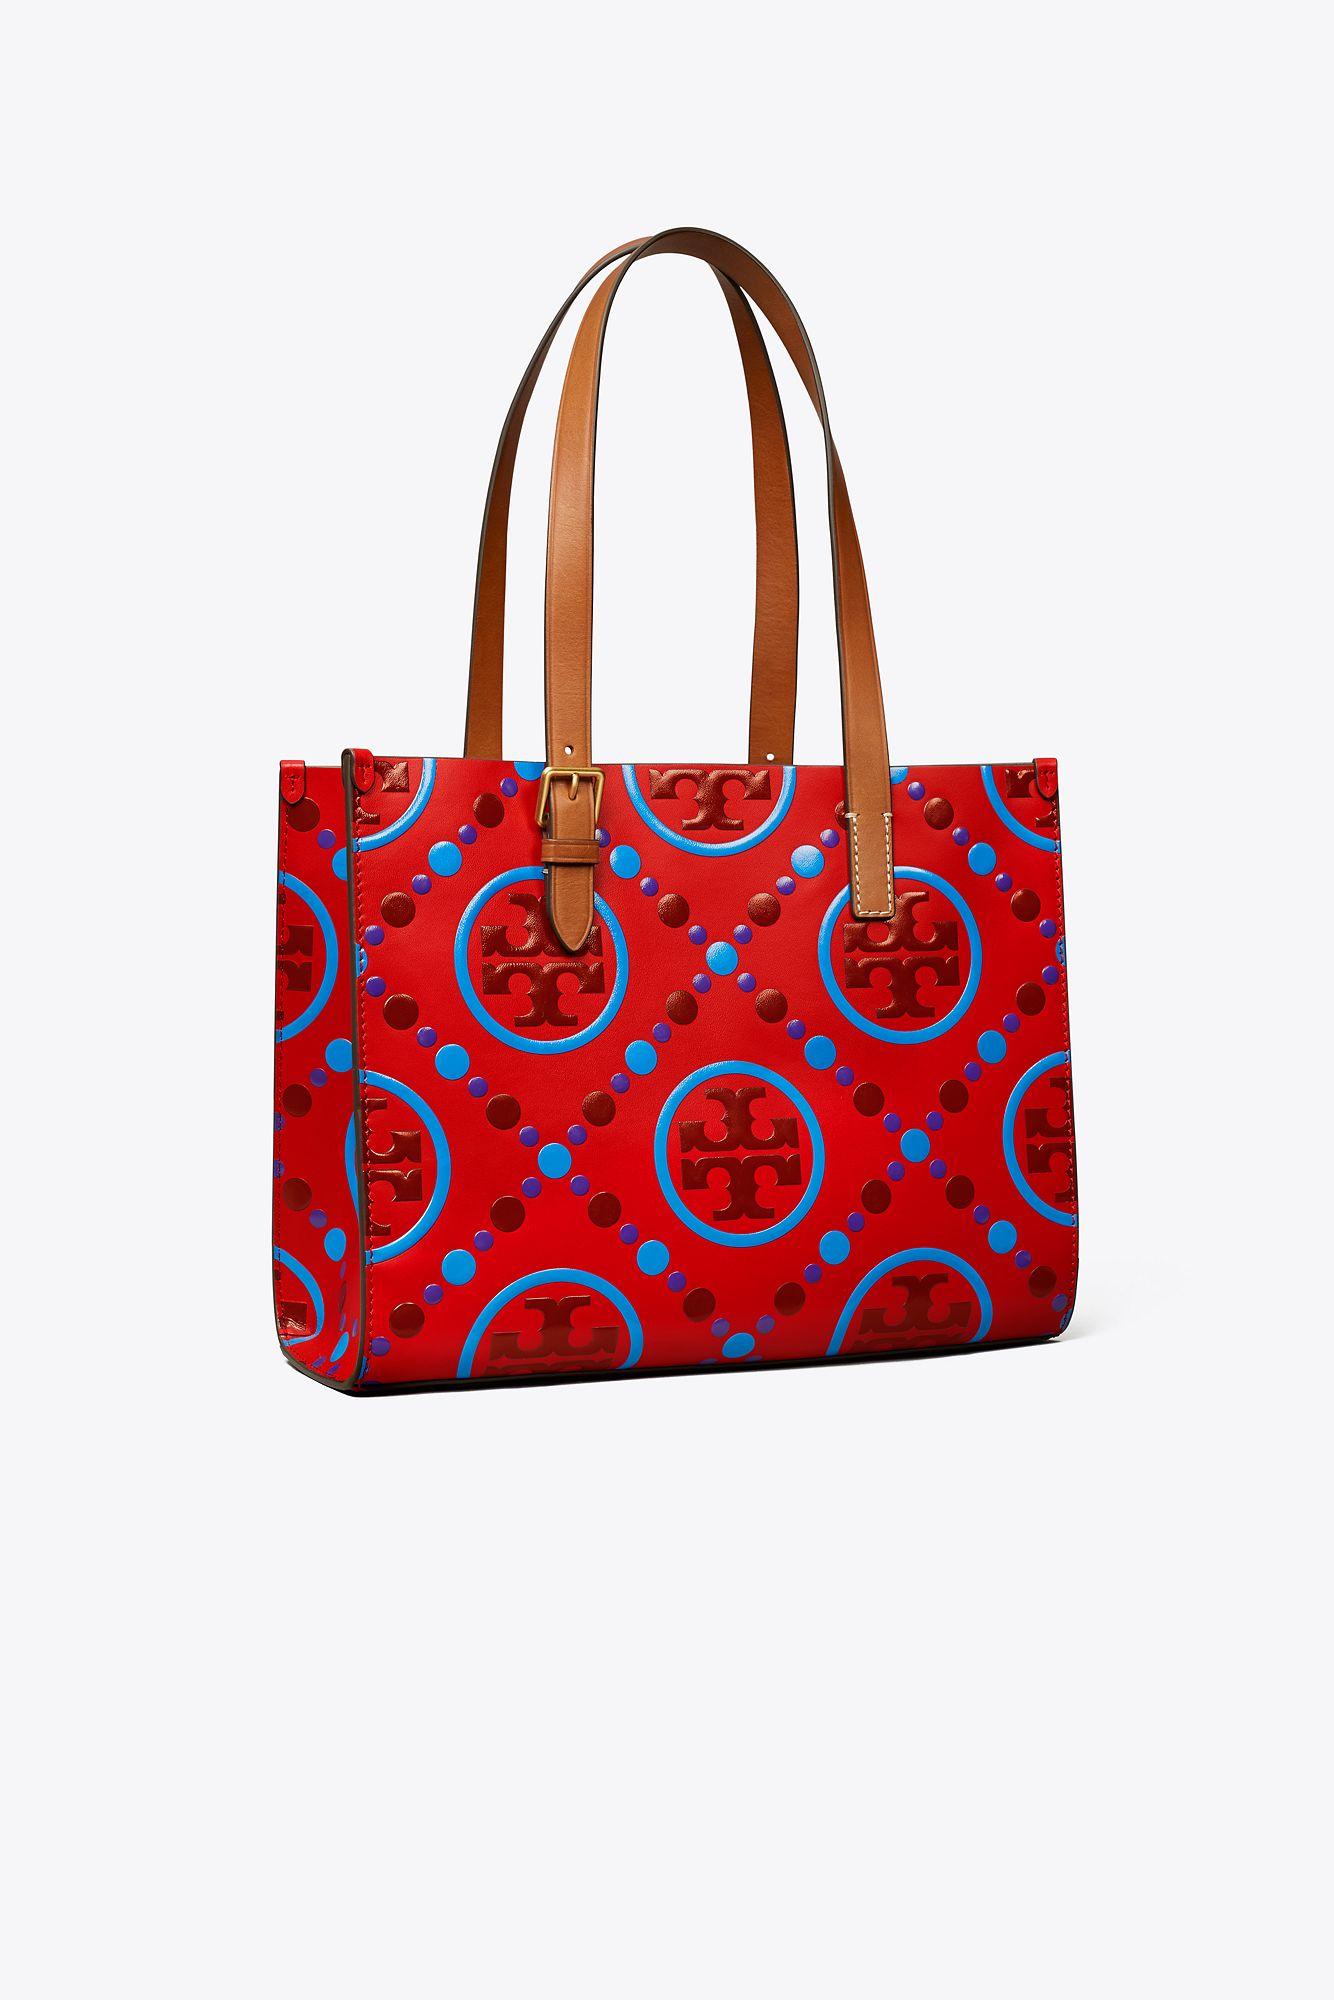 Tory Burch Small T Monogram Contrast Embossed Tote in Red